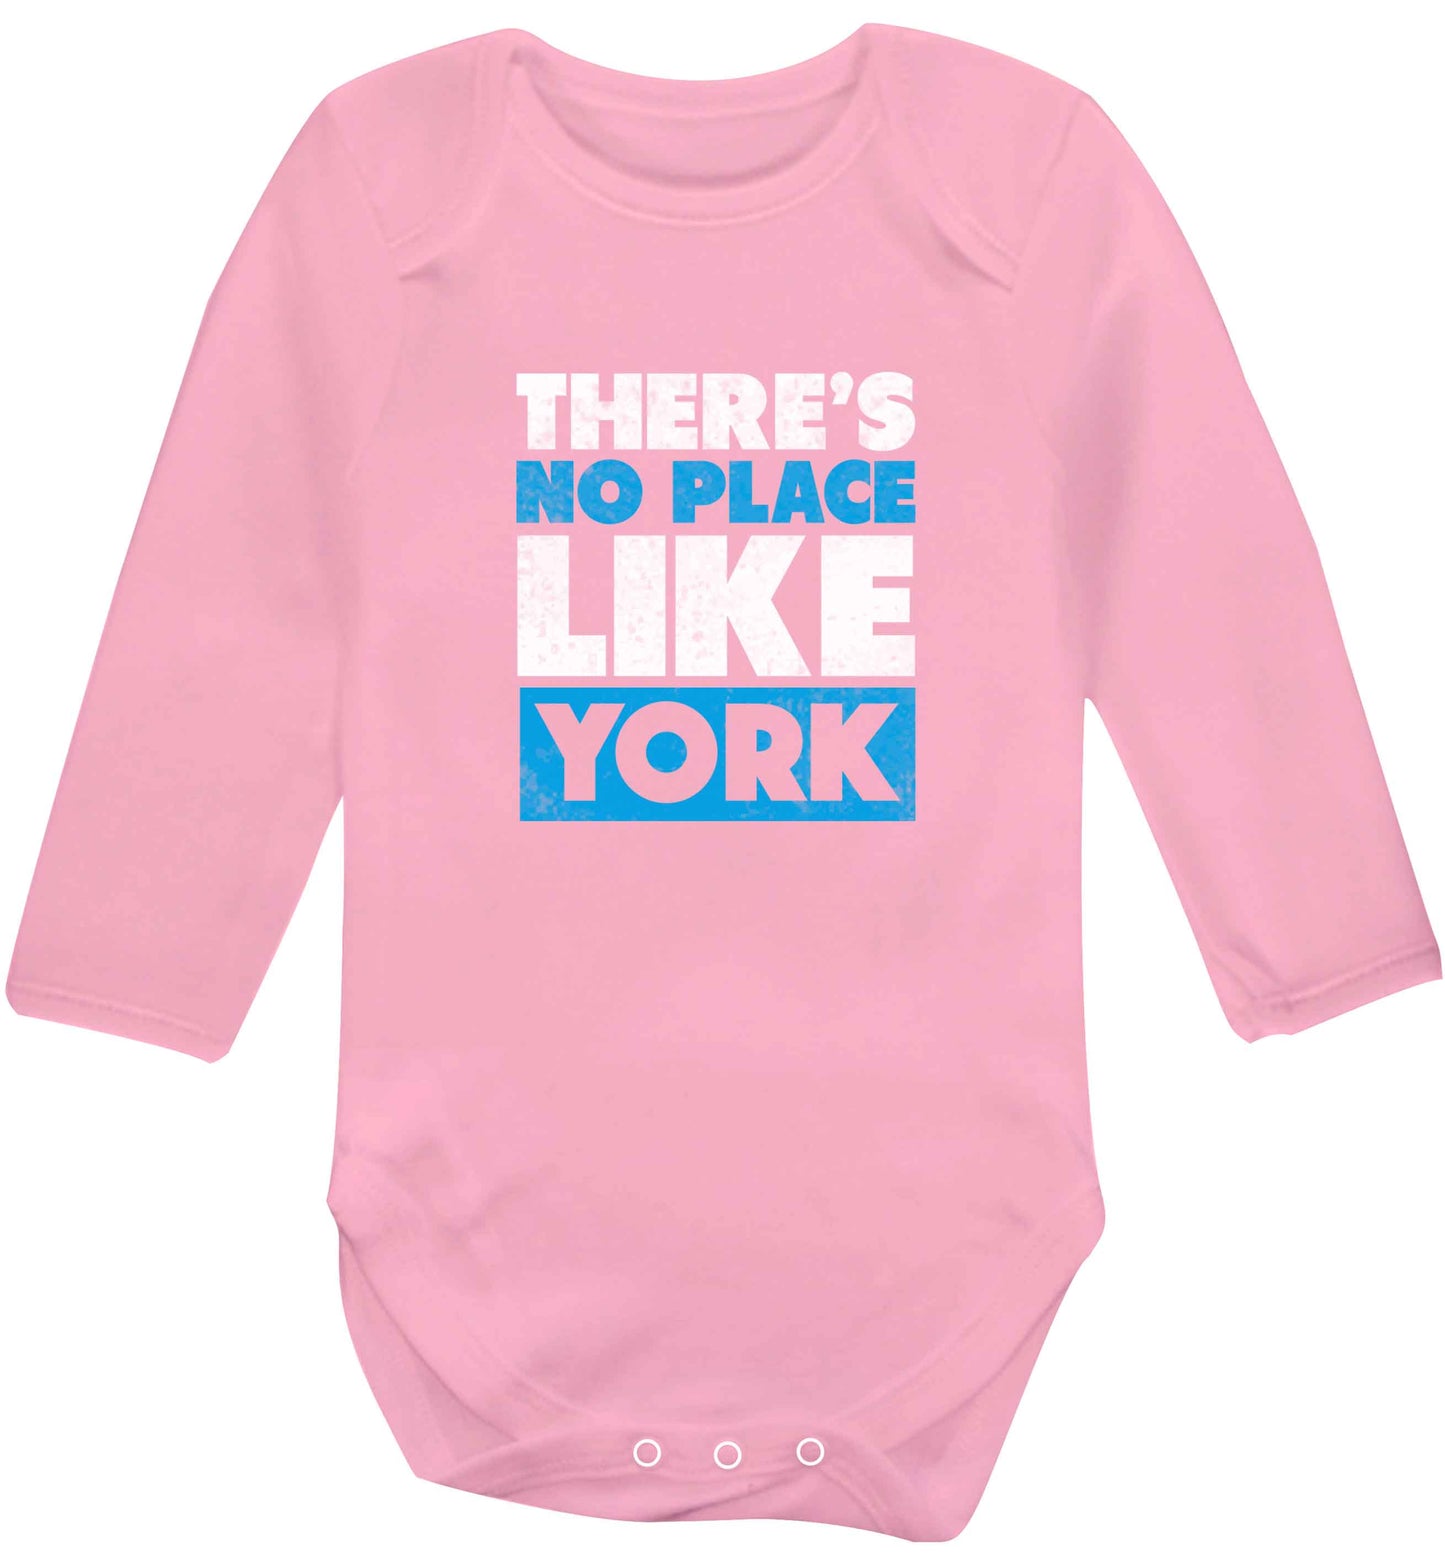 There's no place like york baby vest long sleeved pale pink 6-12 months